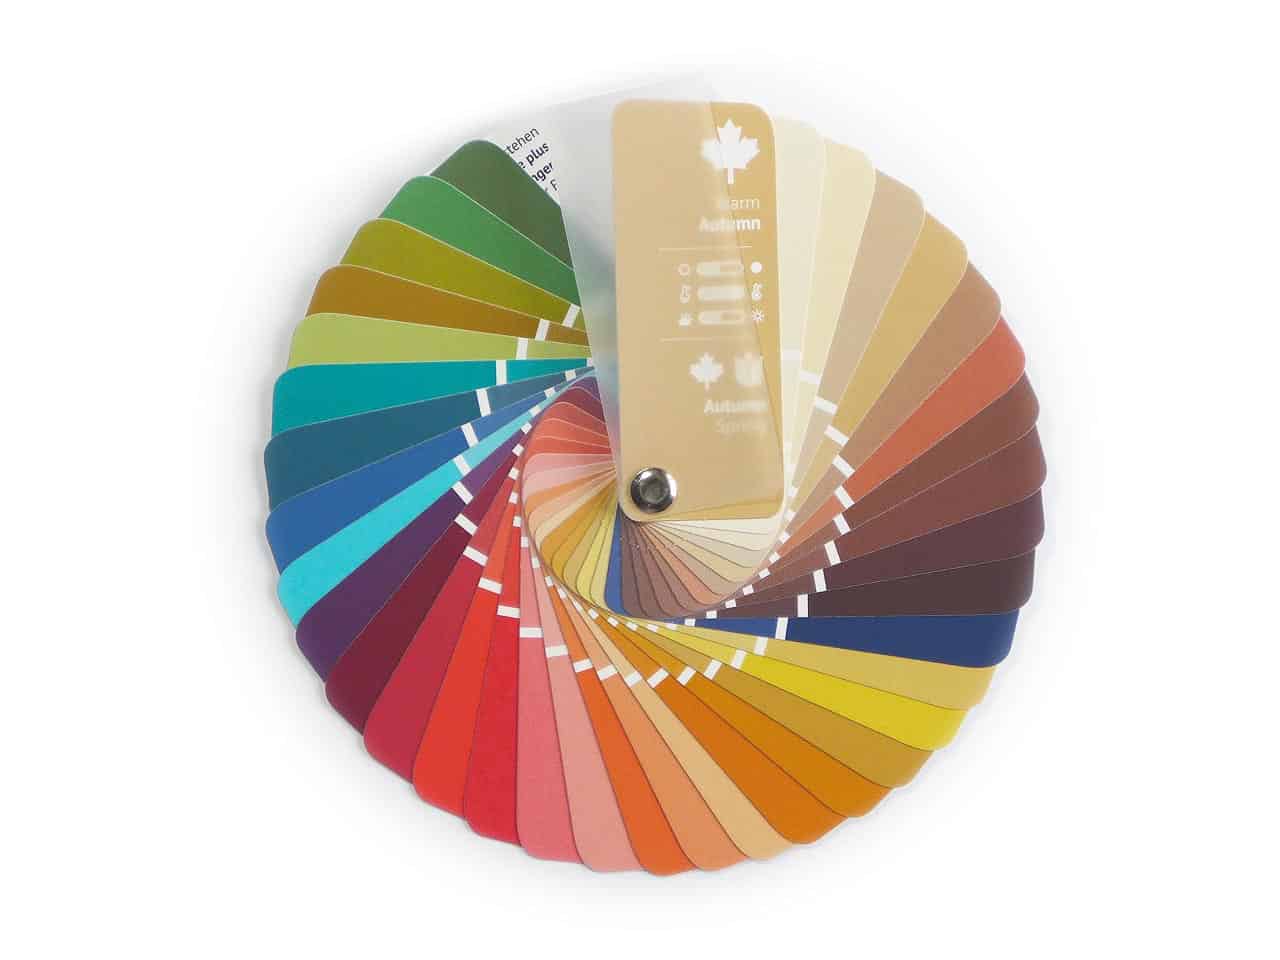 New Color Wheel and Color Fans